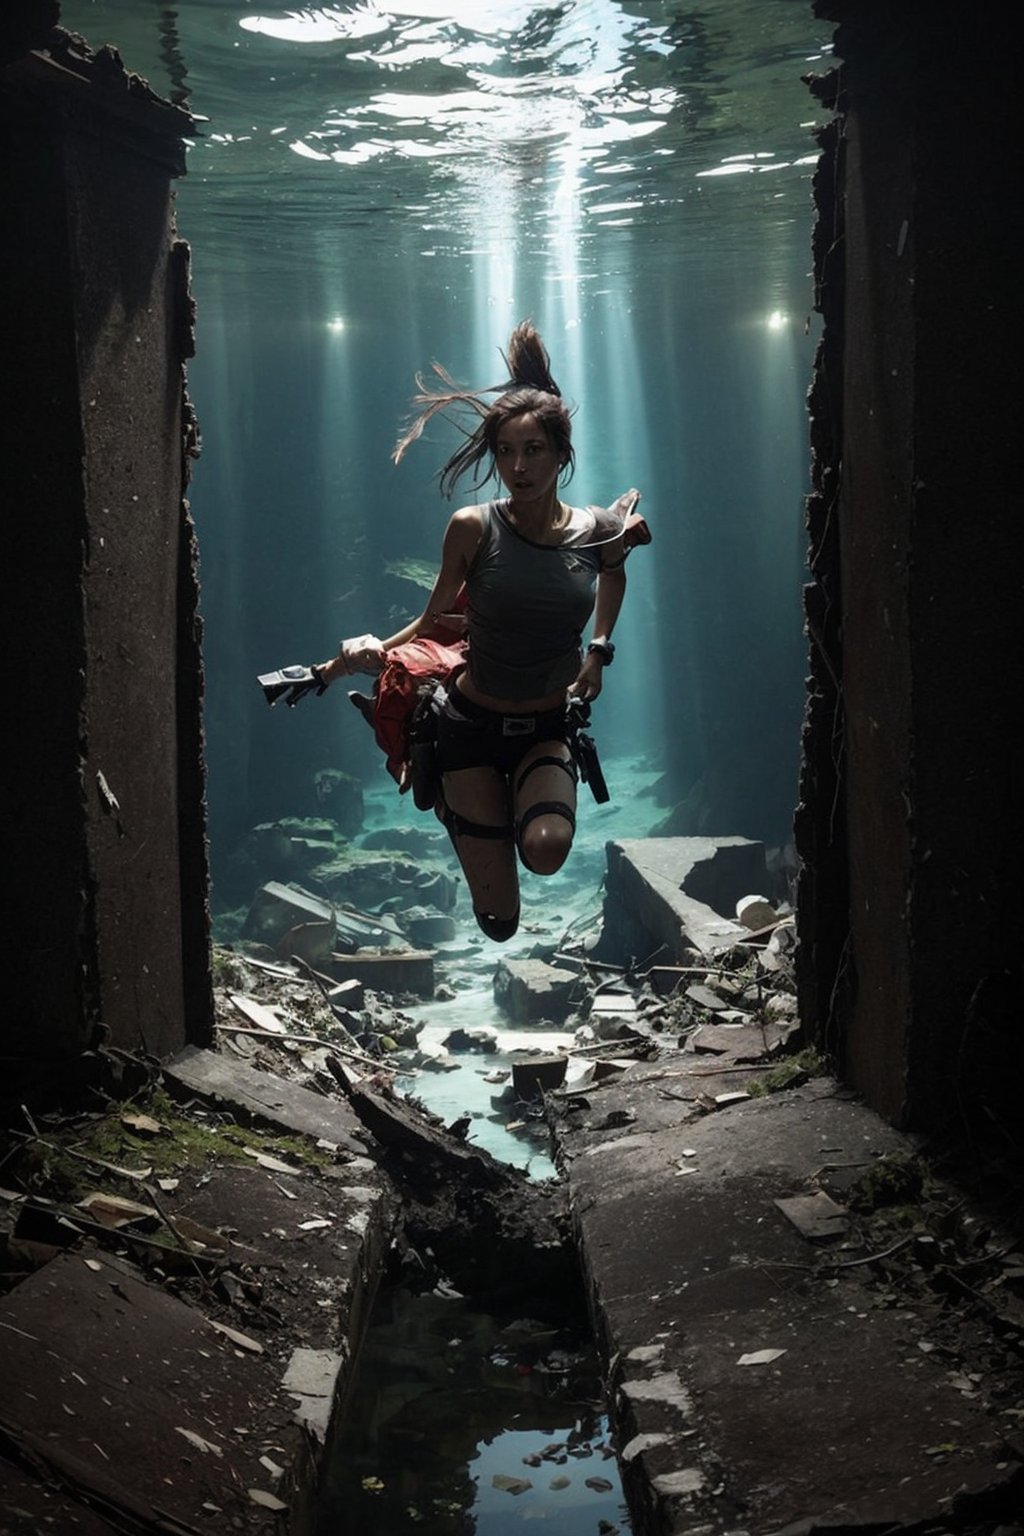 Here's a prompt for an image:

Lara Croft, dressed in adventurer attire, leaps from the depths of a derelict underwater ruin. The camera frames her mid-jump, just as she breaks through the surface of the water, illuminated by a faint, glistening glow emanating from within the ancient structure's crumbling walls. The surrounding darkness is punctuated only by the eerie glow and the scattered rubble on the partially submerged floor, with broken plaster and worn-out floorboards visible in the distance. Her wet clothing clings to her body as she emerges into the dimly lit atmosphere of this forgotten tomb.